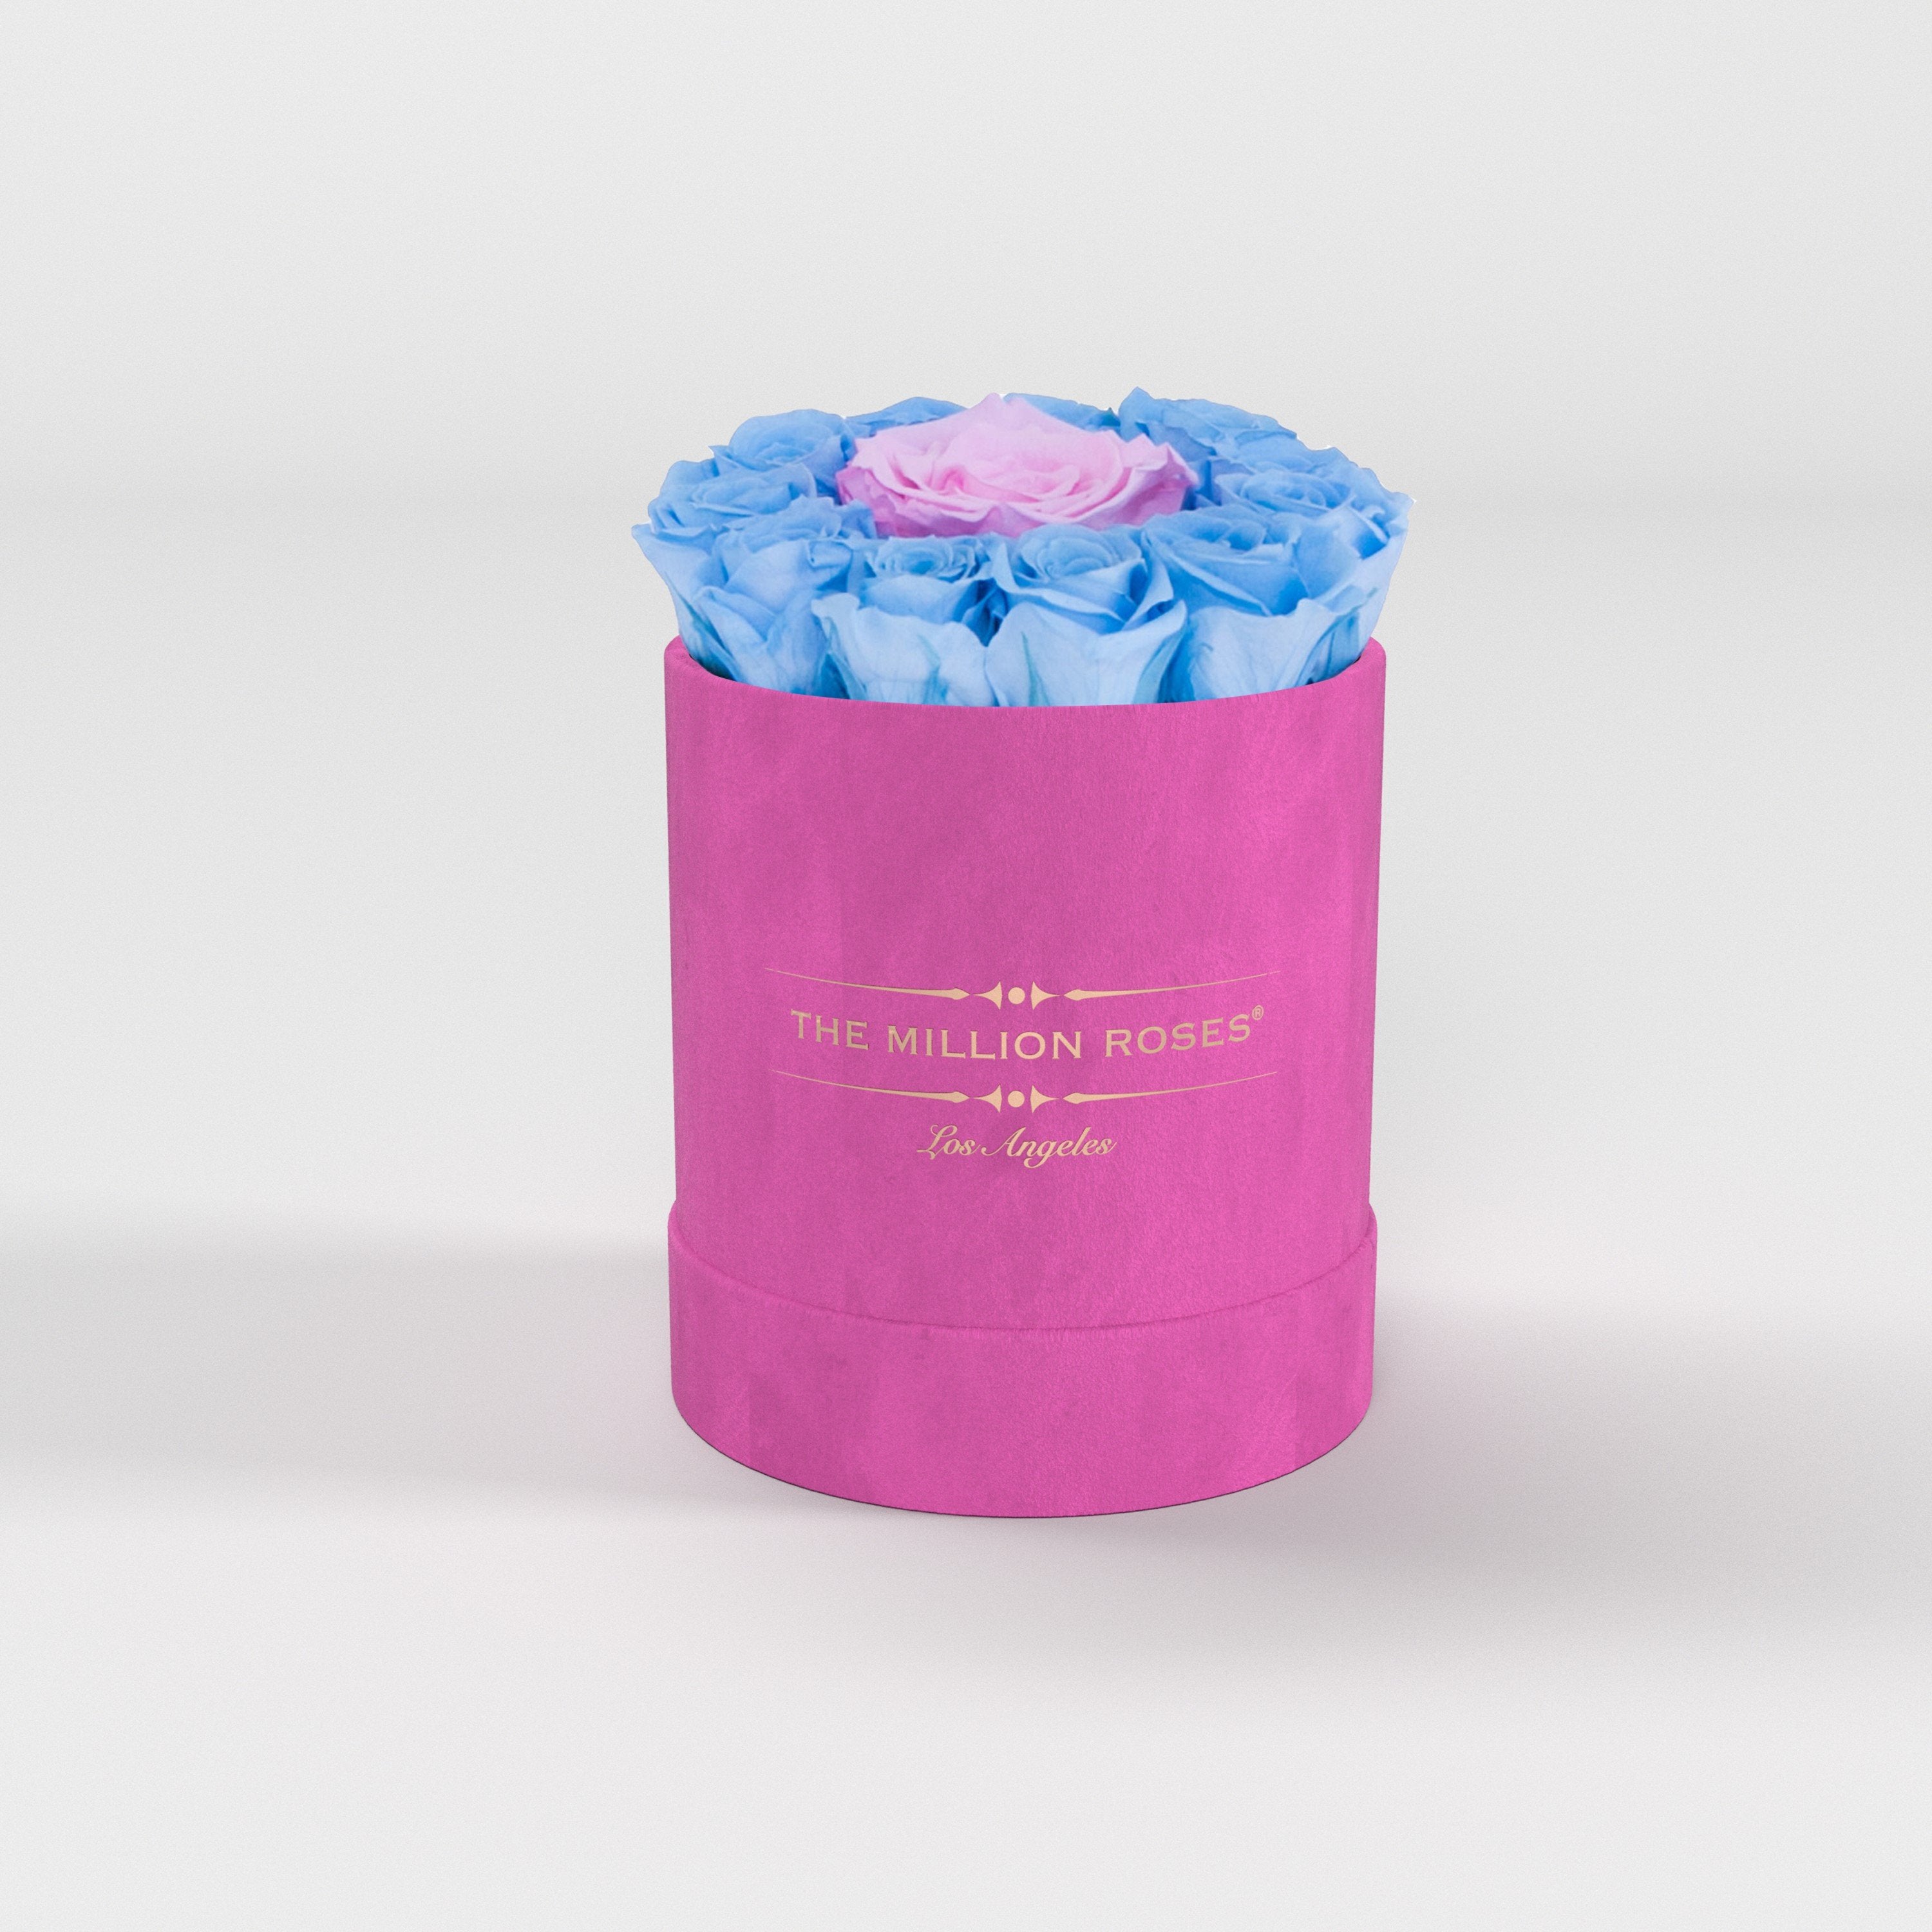 basic round box - hot-pink suede (LA) light-blue mini + 1 rose in middle blue roses - the million roses